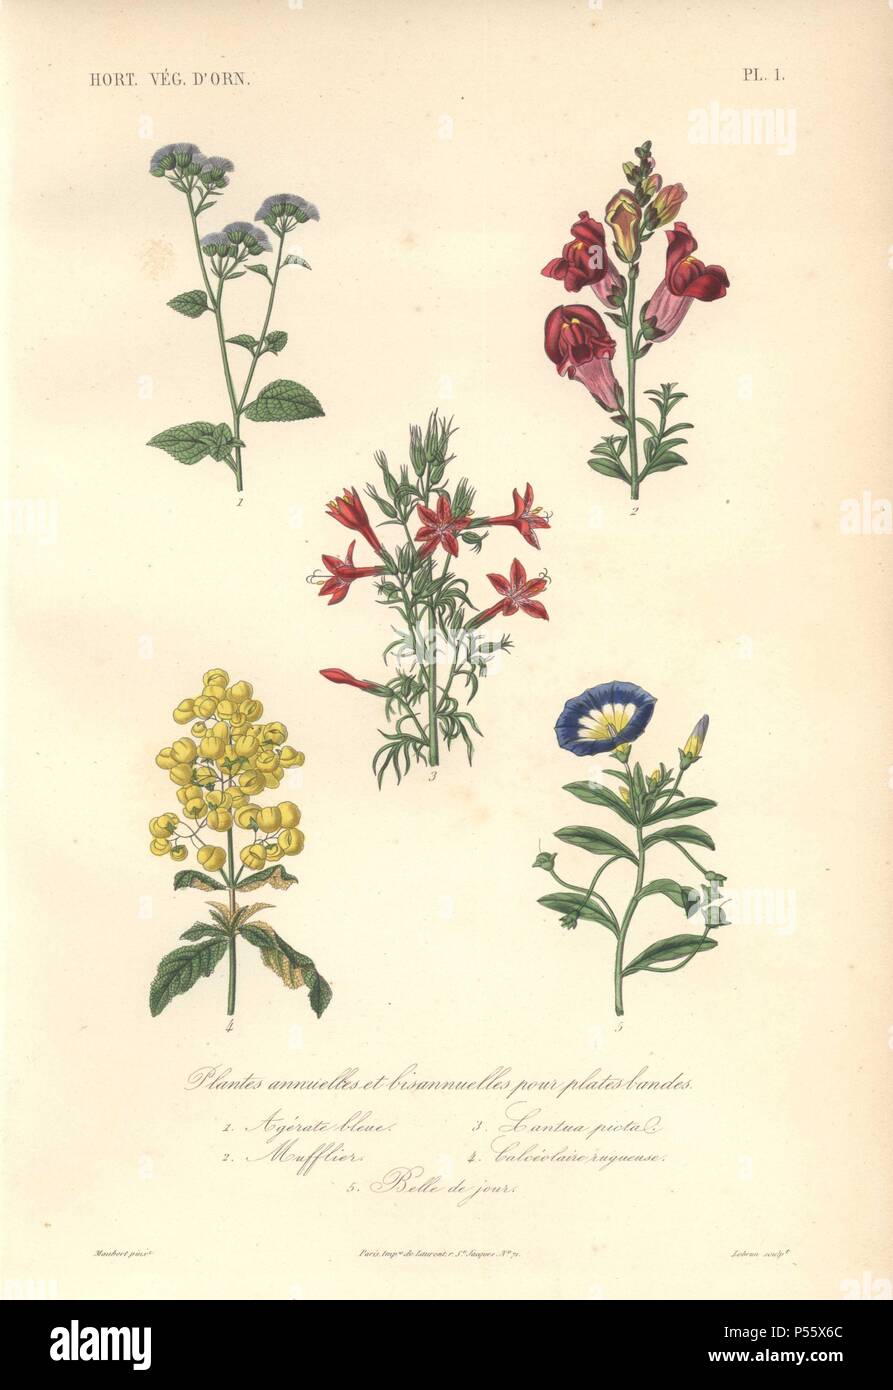 Annual and biannuals including blue flossflower (Ageratum houstonianum), snapdragon (Antirrhinum majus), scarlet Cantuta (Cantua buxifolia), yellow ladies purse (Calceolaria), and dwarf morning glory (Convolvulus tricolor).. Plantes annuelles et biannuelles: 1) Agerate bleu 2) Mufflier 3) Cantua picta 4) Calceolaire sugueuse 5) Belle de jour. . Handcolored lithograph drawn by Edouard Maubert from Herincq's 'Le Regne Vegetal' 1865. Stock Photo